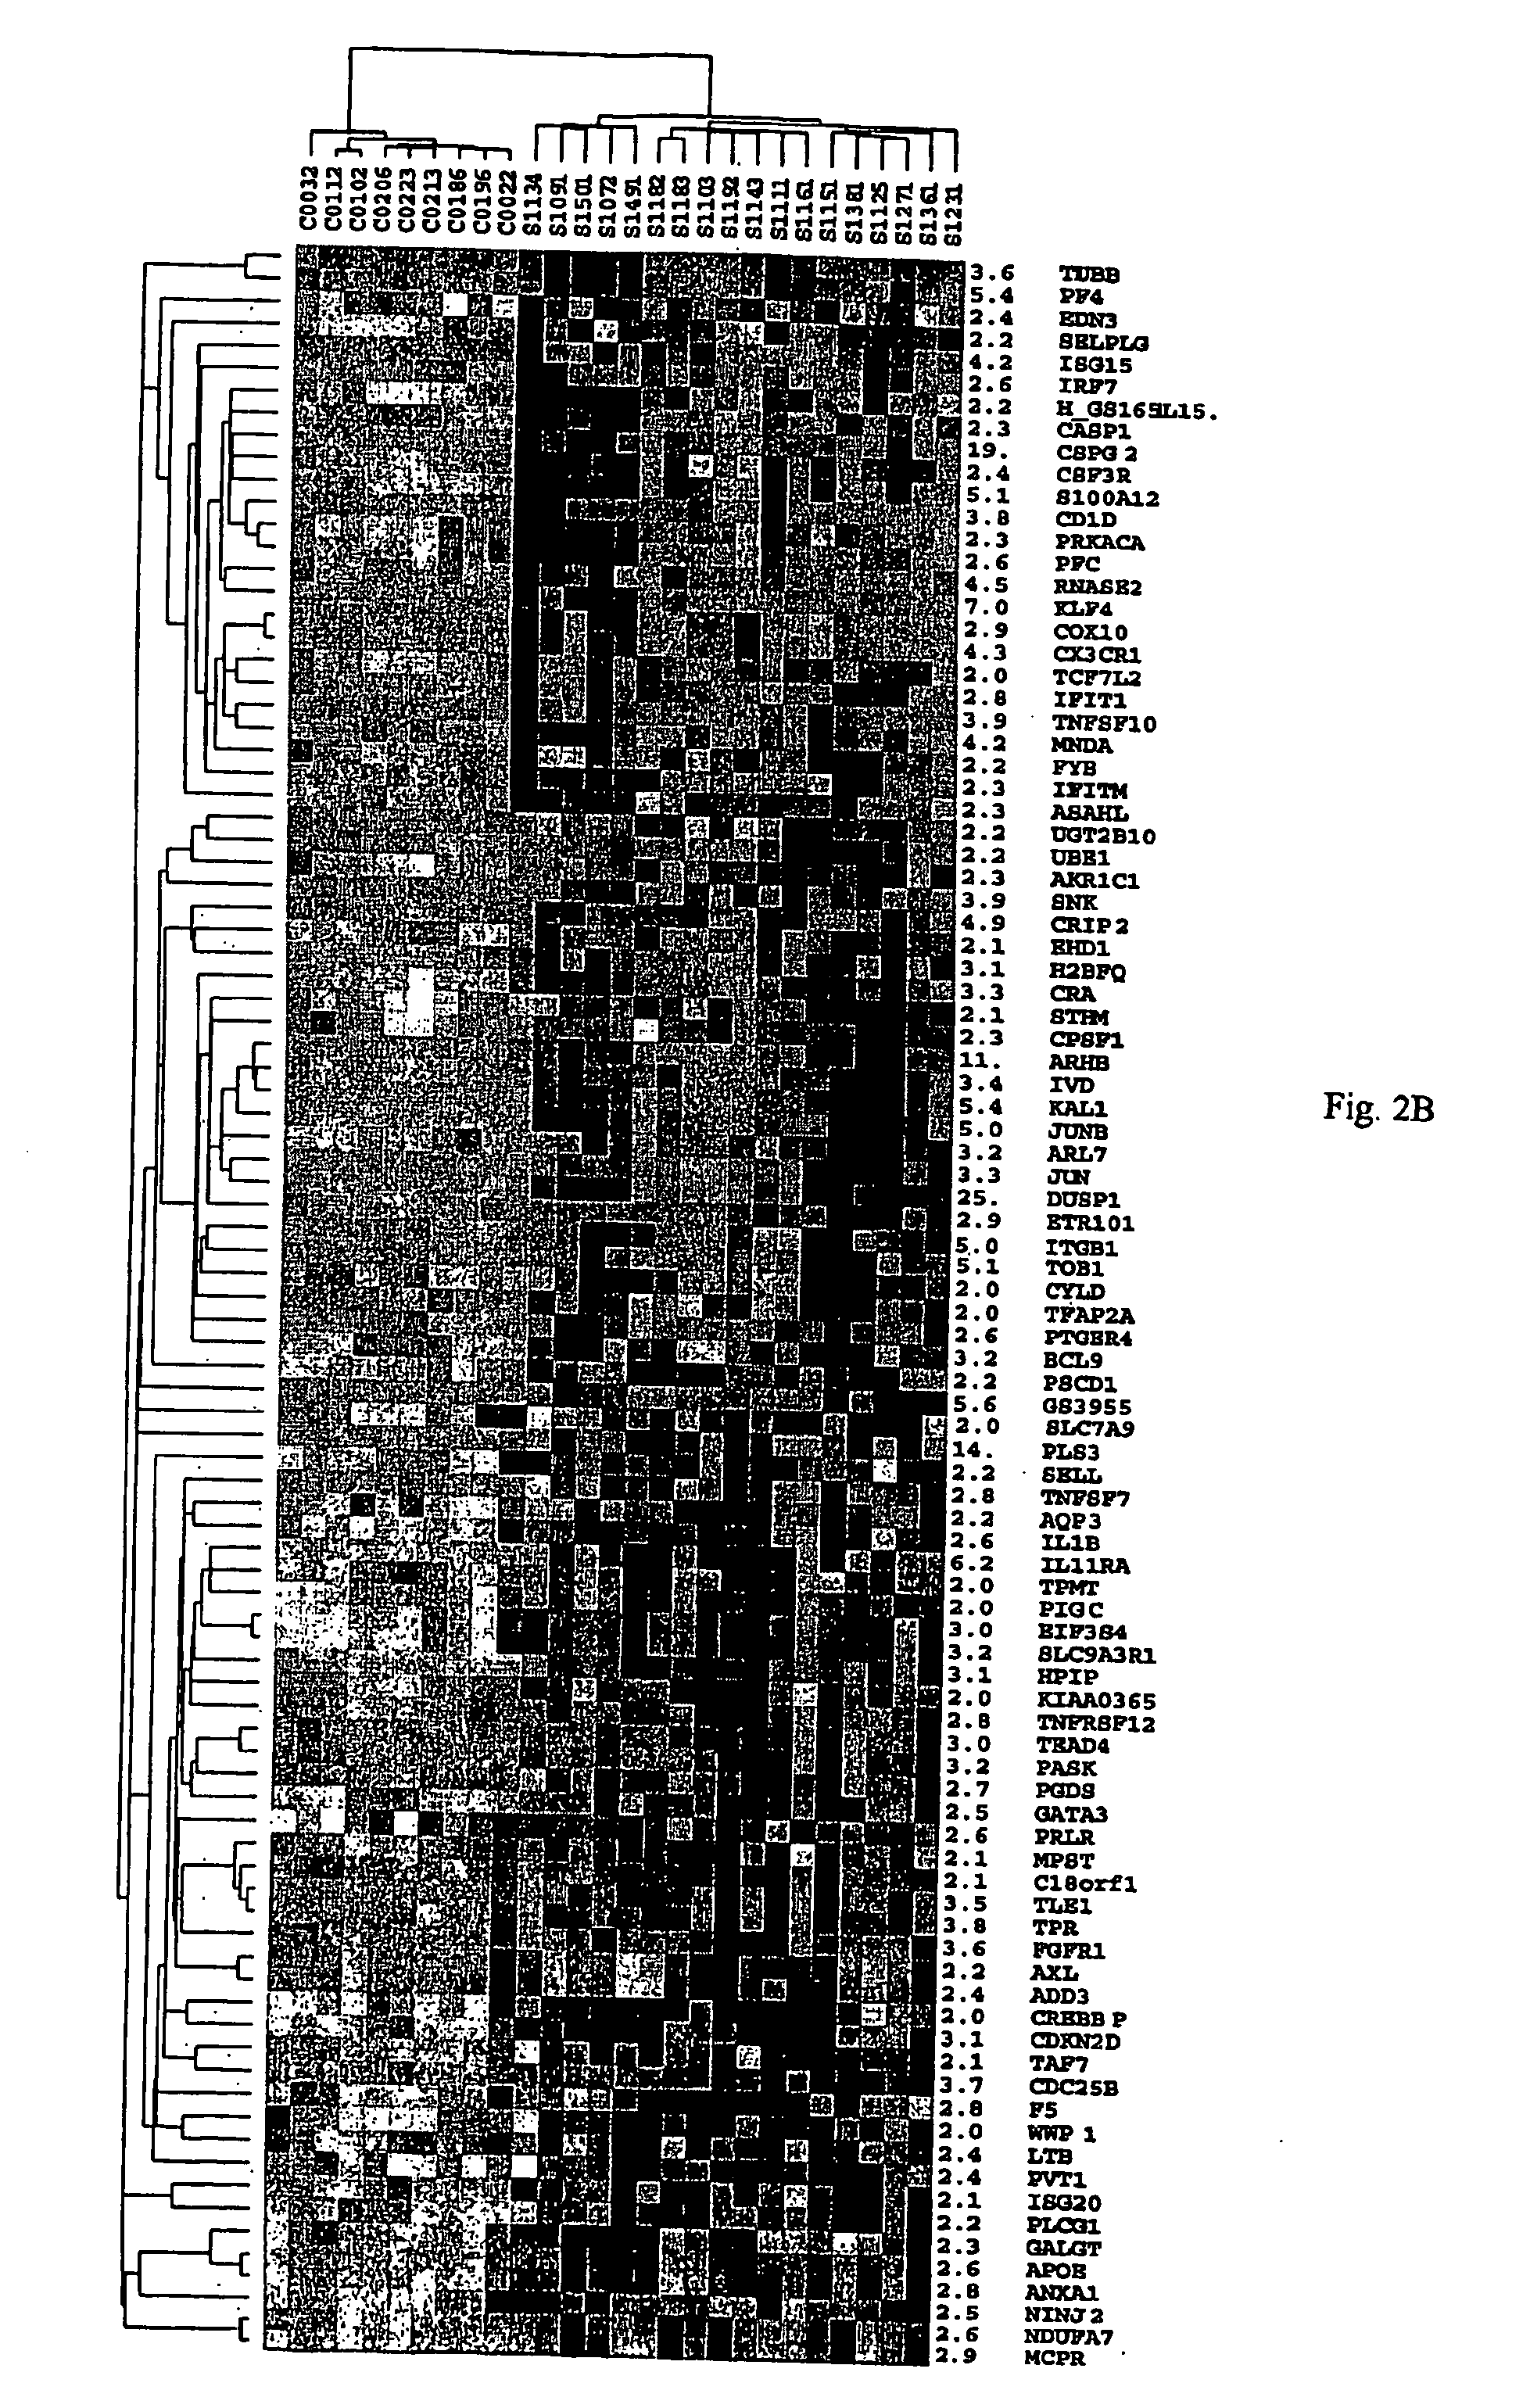 Method of diagnosis of cancer based on gene expression profiles in cells